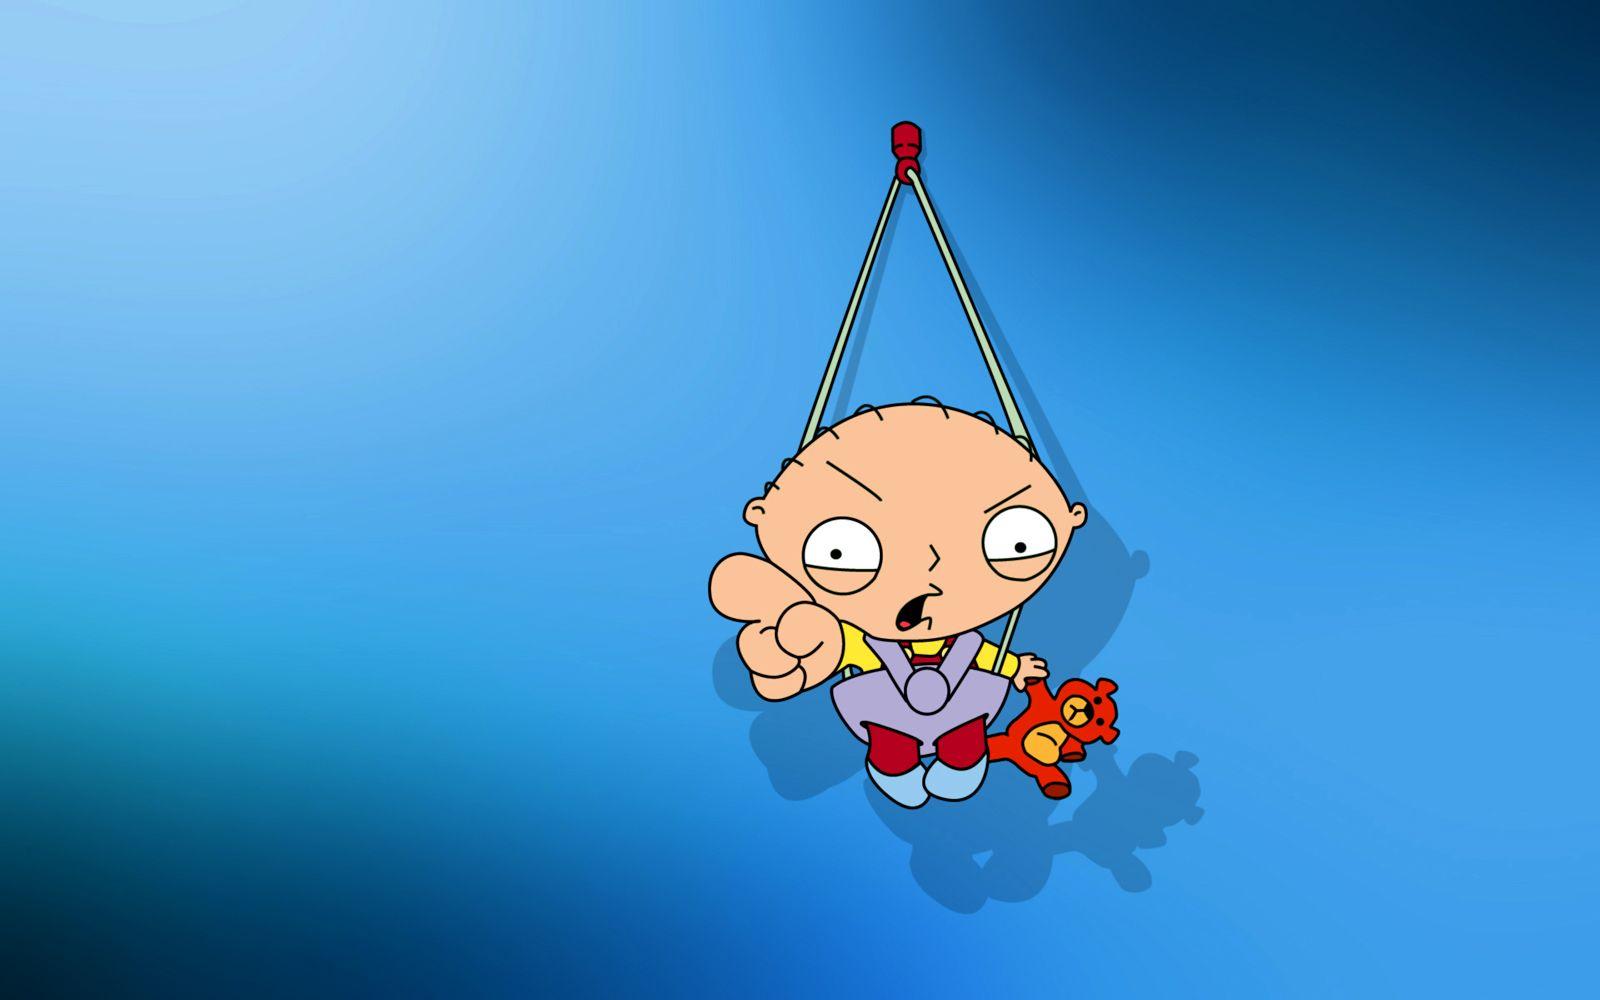 FUNNY STEWIE GRIFFIN FAMILY GUY HD WALLPAPERS For Windows 7